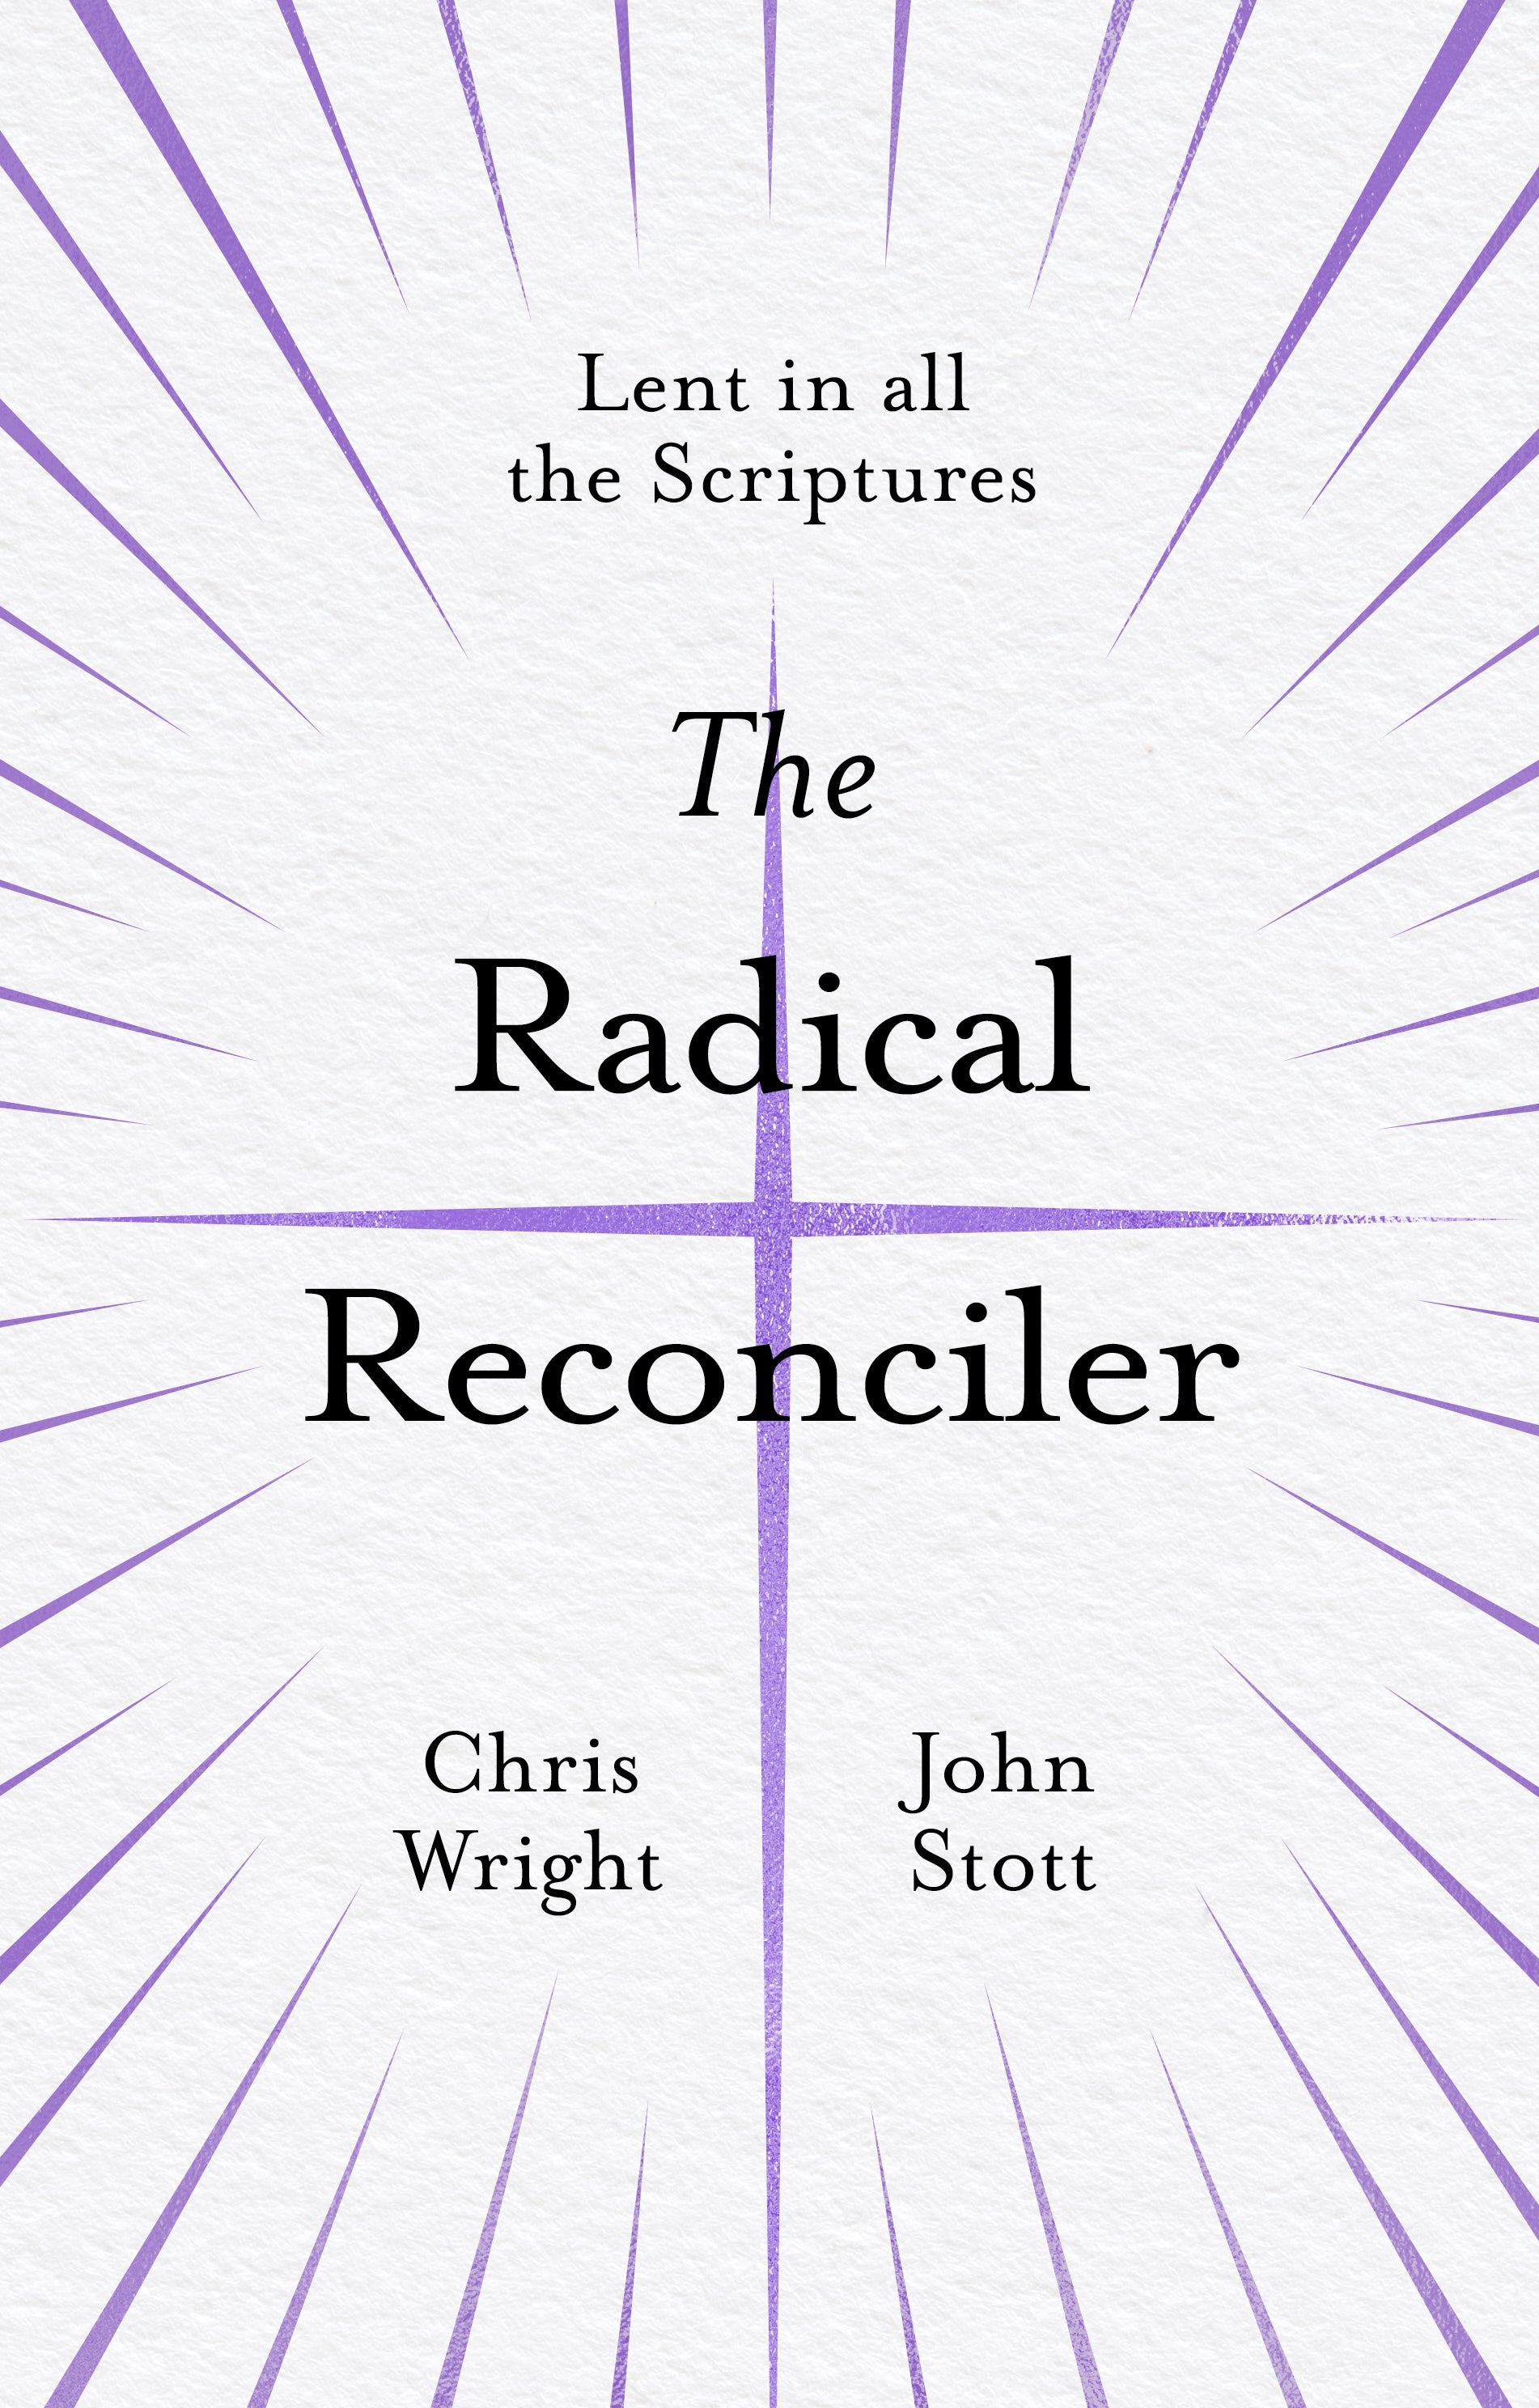 Image of The Radical Reconciler other